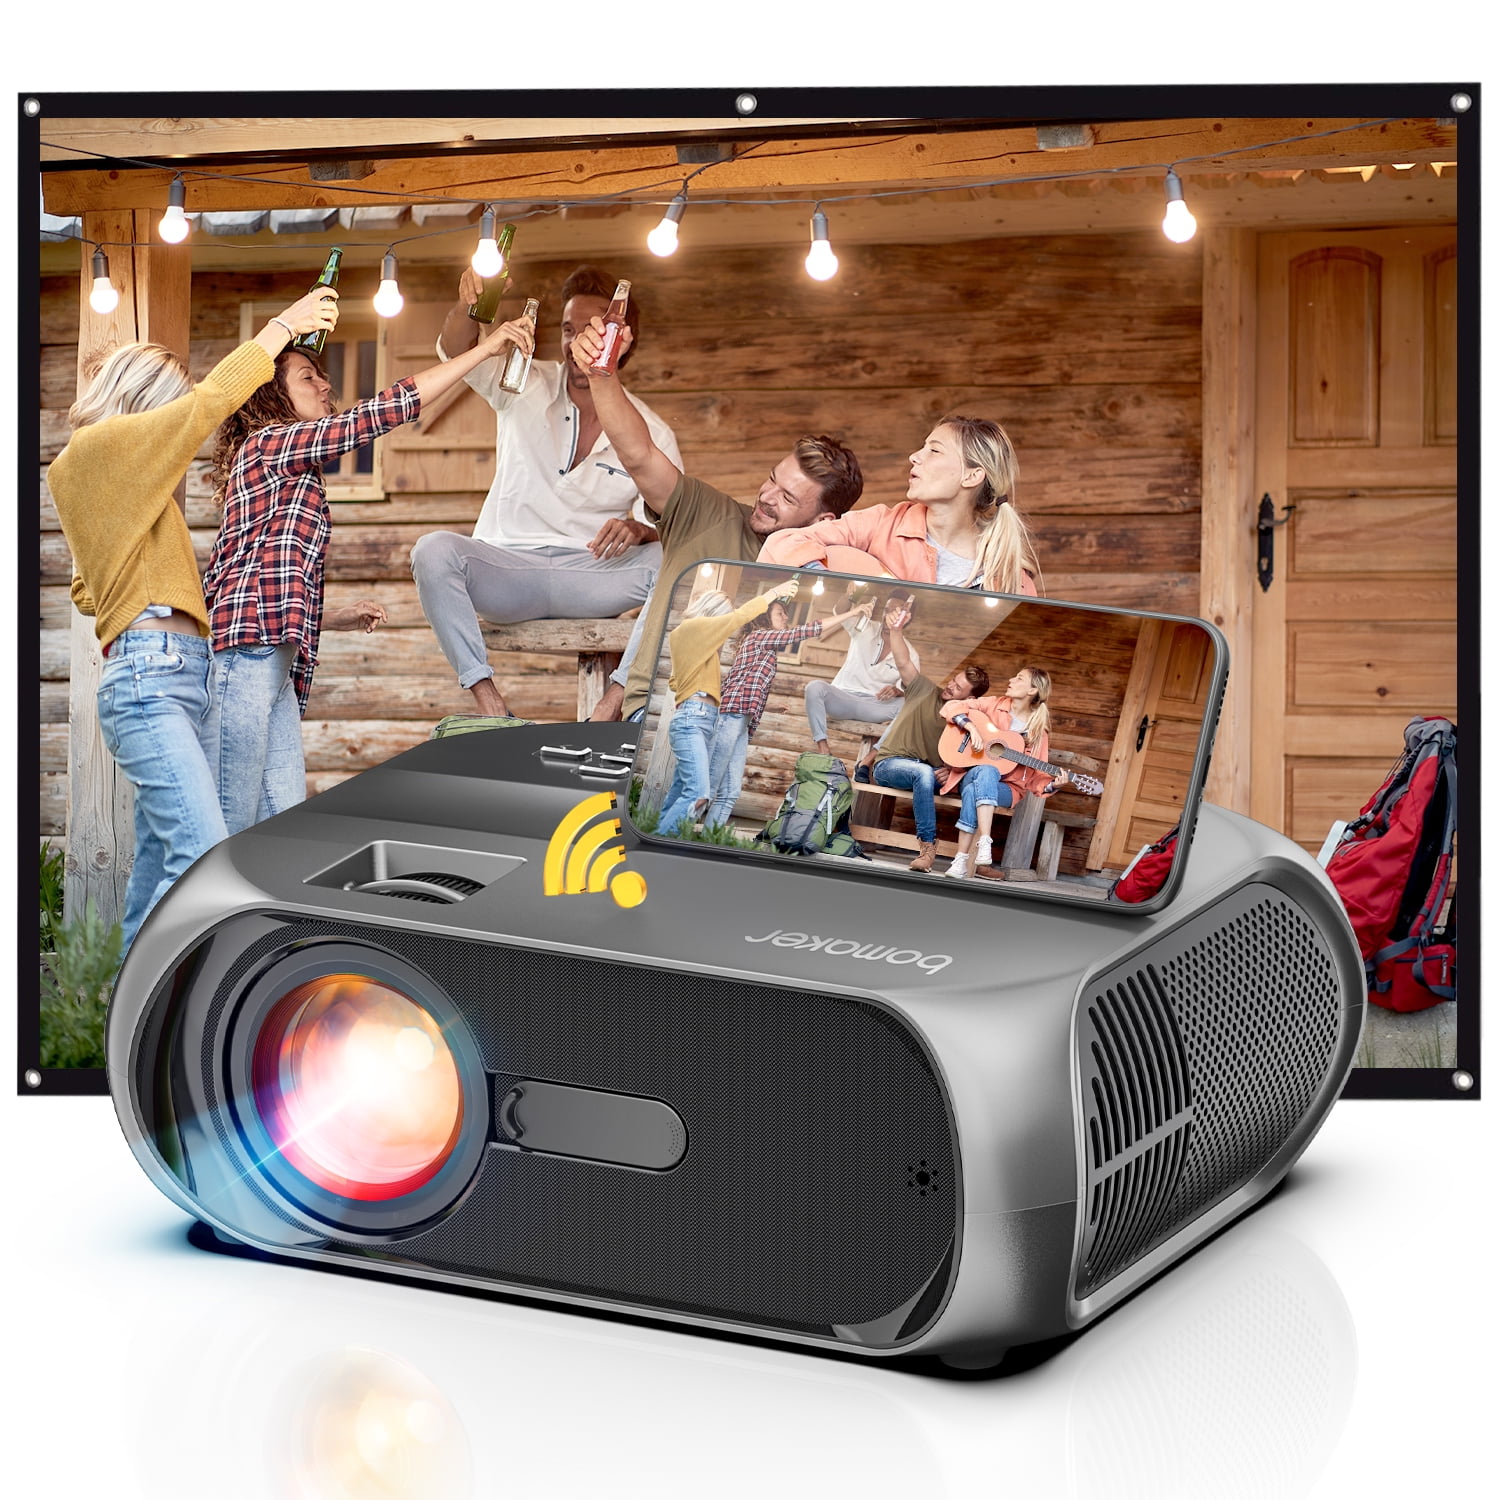 Bomaker WiFi Mini Projector | 200" Display and Full HD 1080p Supported |  Portable Outdoor Movie Projector | Video Home Theater Projector -  Walmart.com